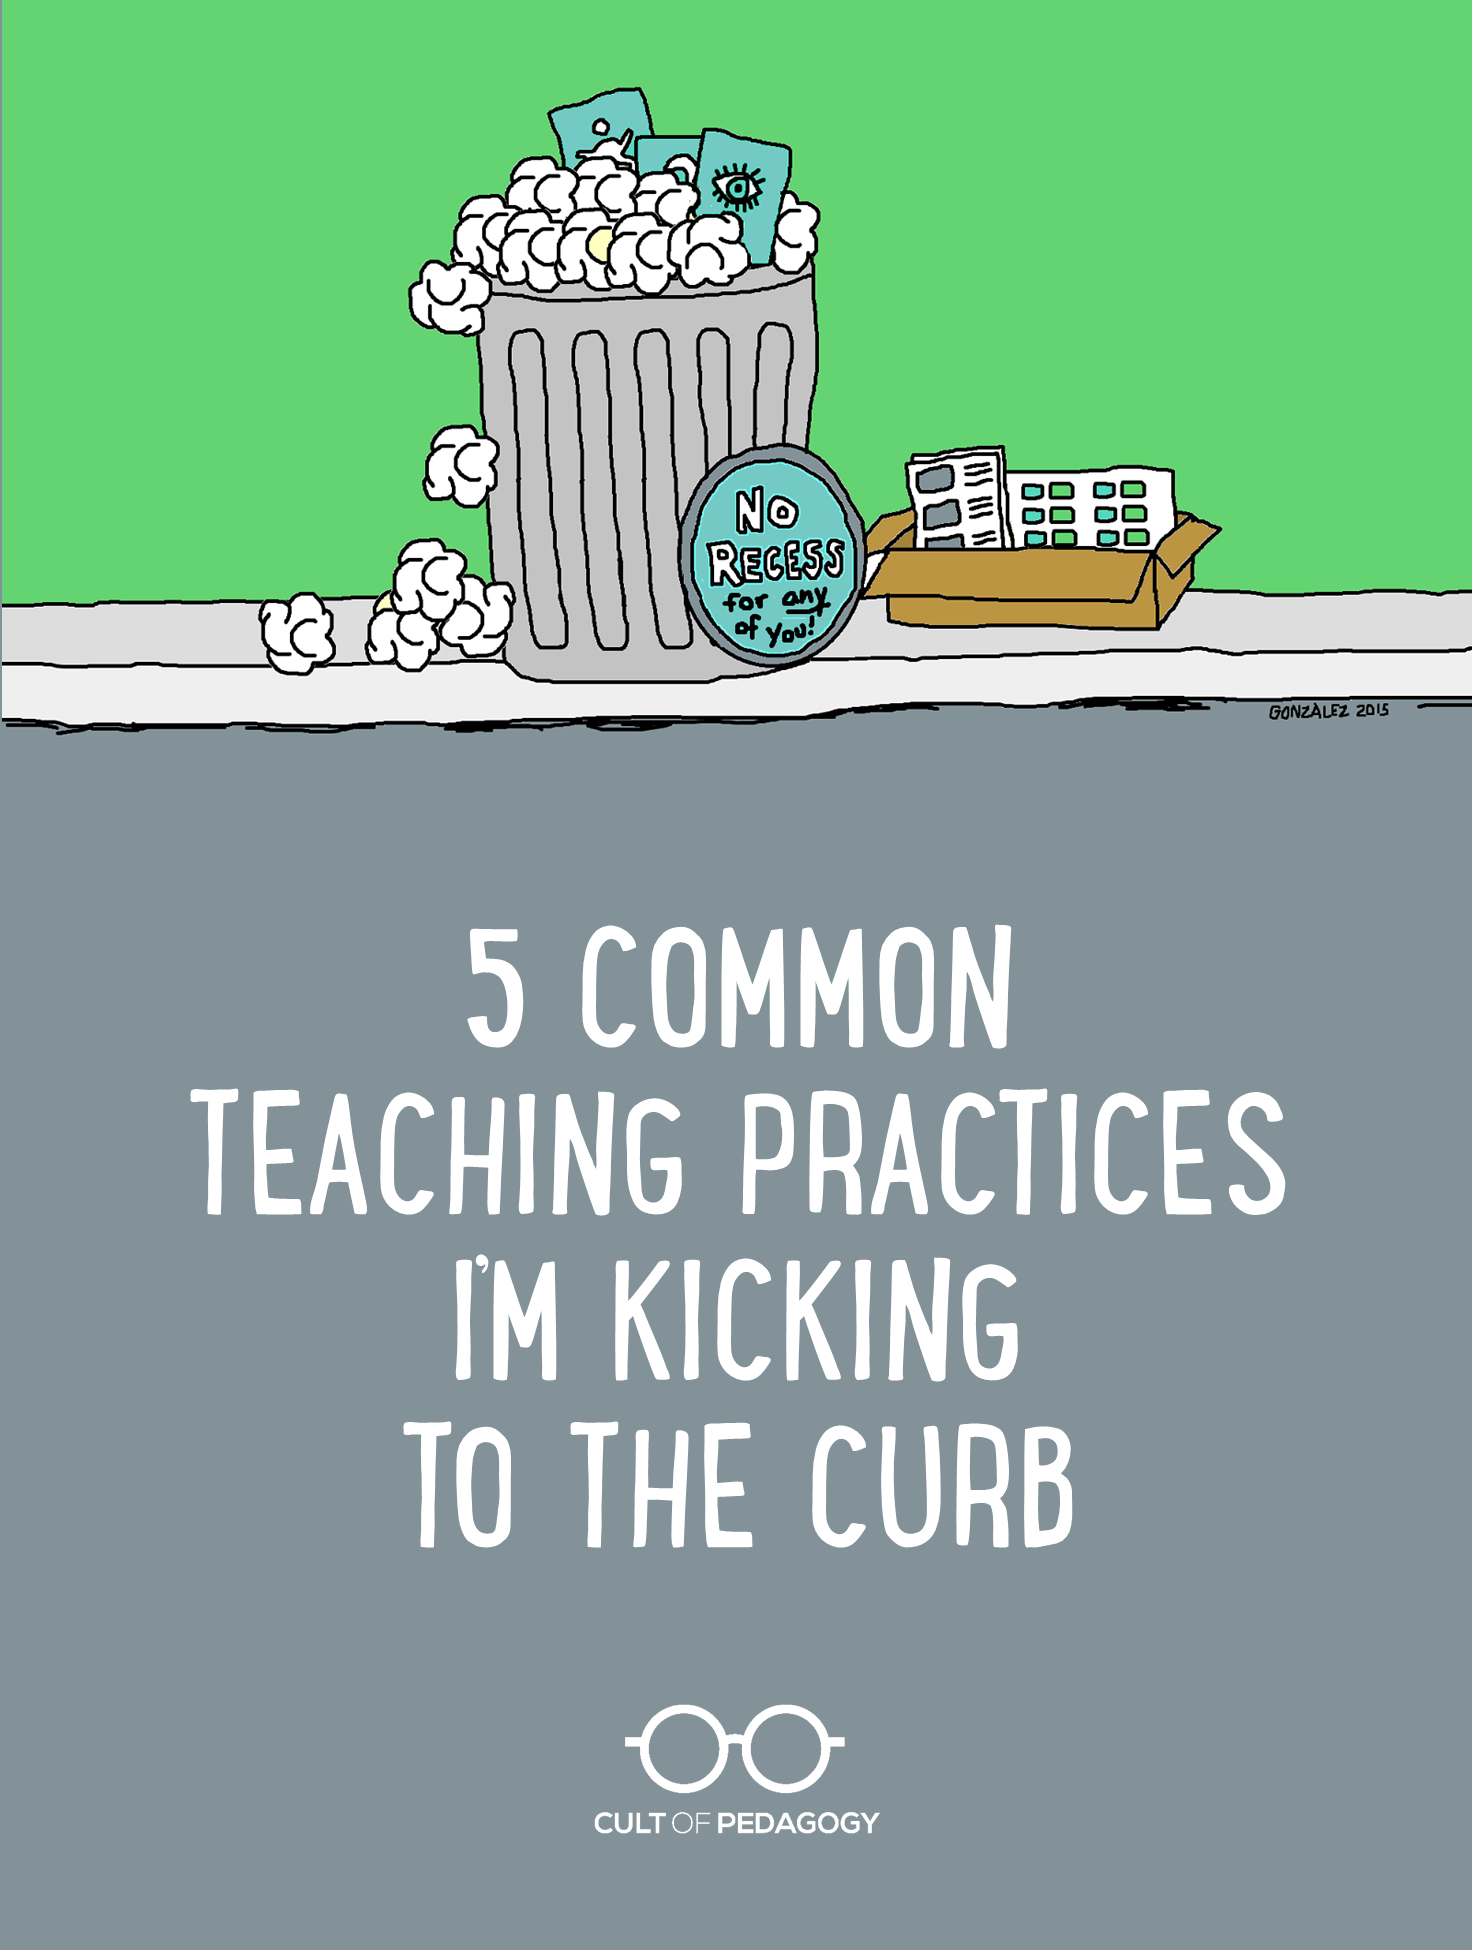 5 Teaching Practices I'm Kicking to the Curb